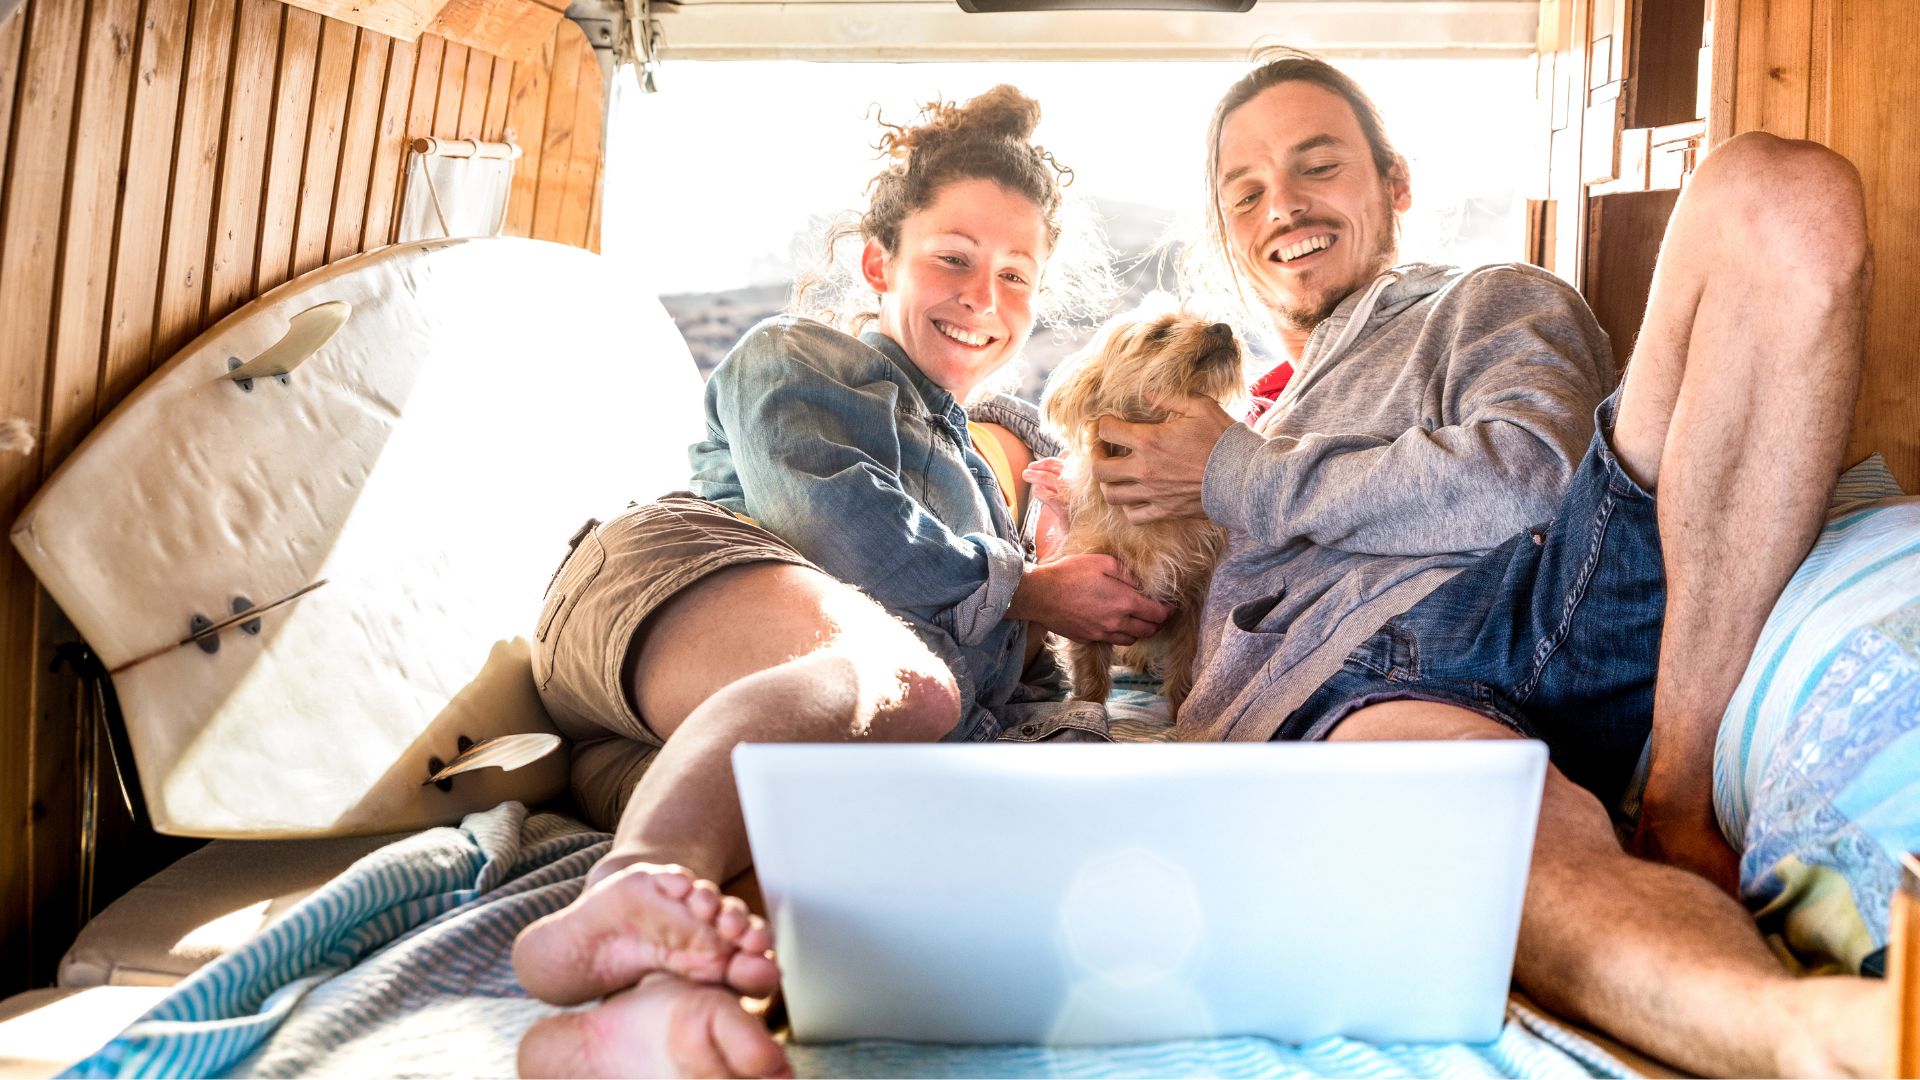 The Explosion of Vanlife Culture: Could You Live in a Campervan?